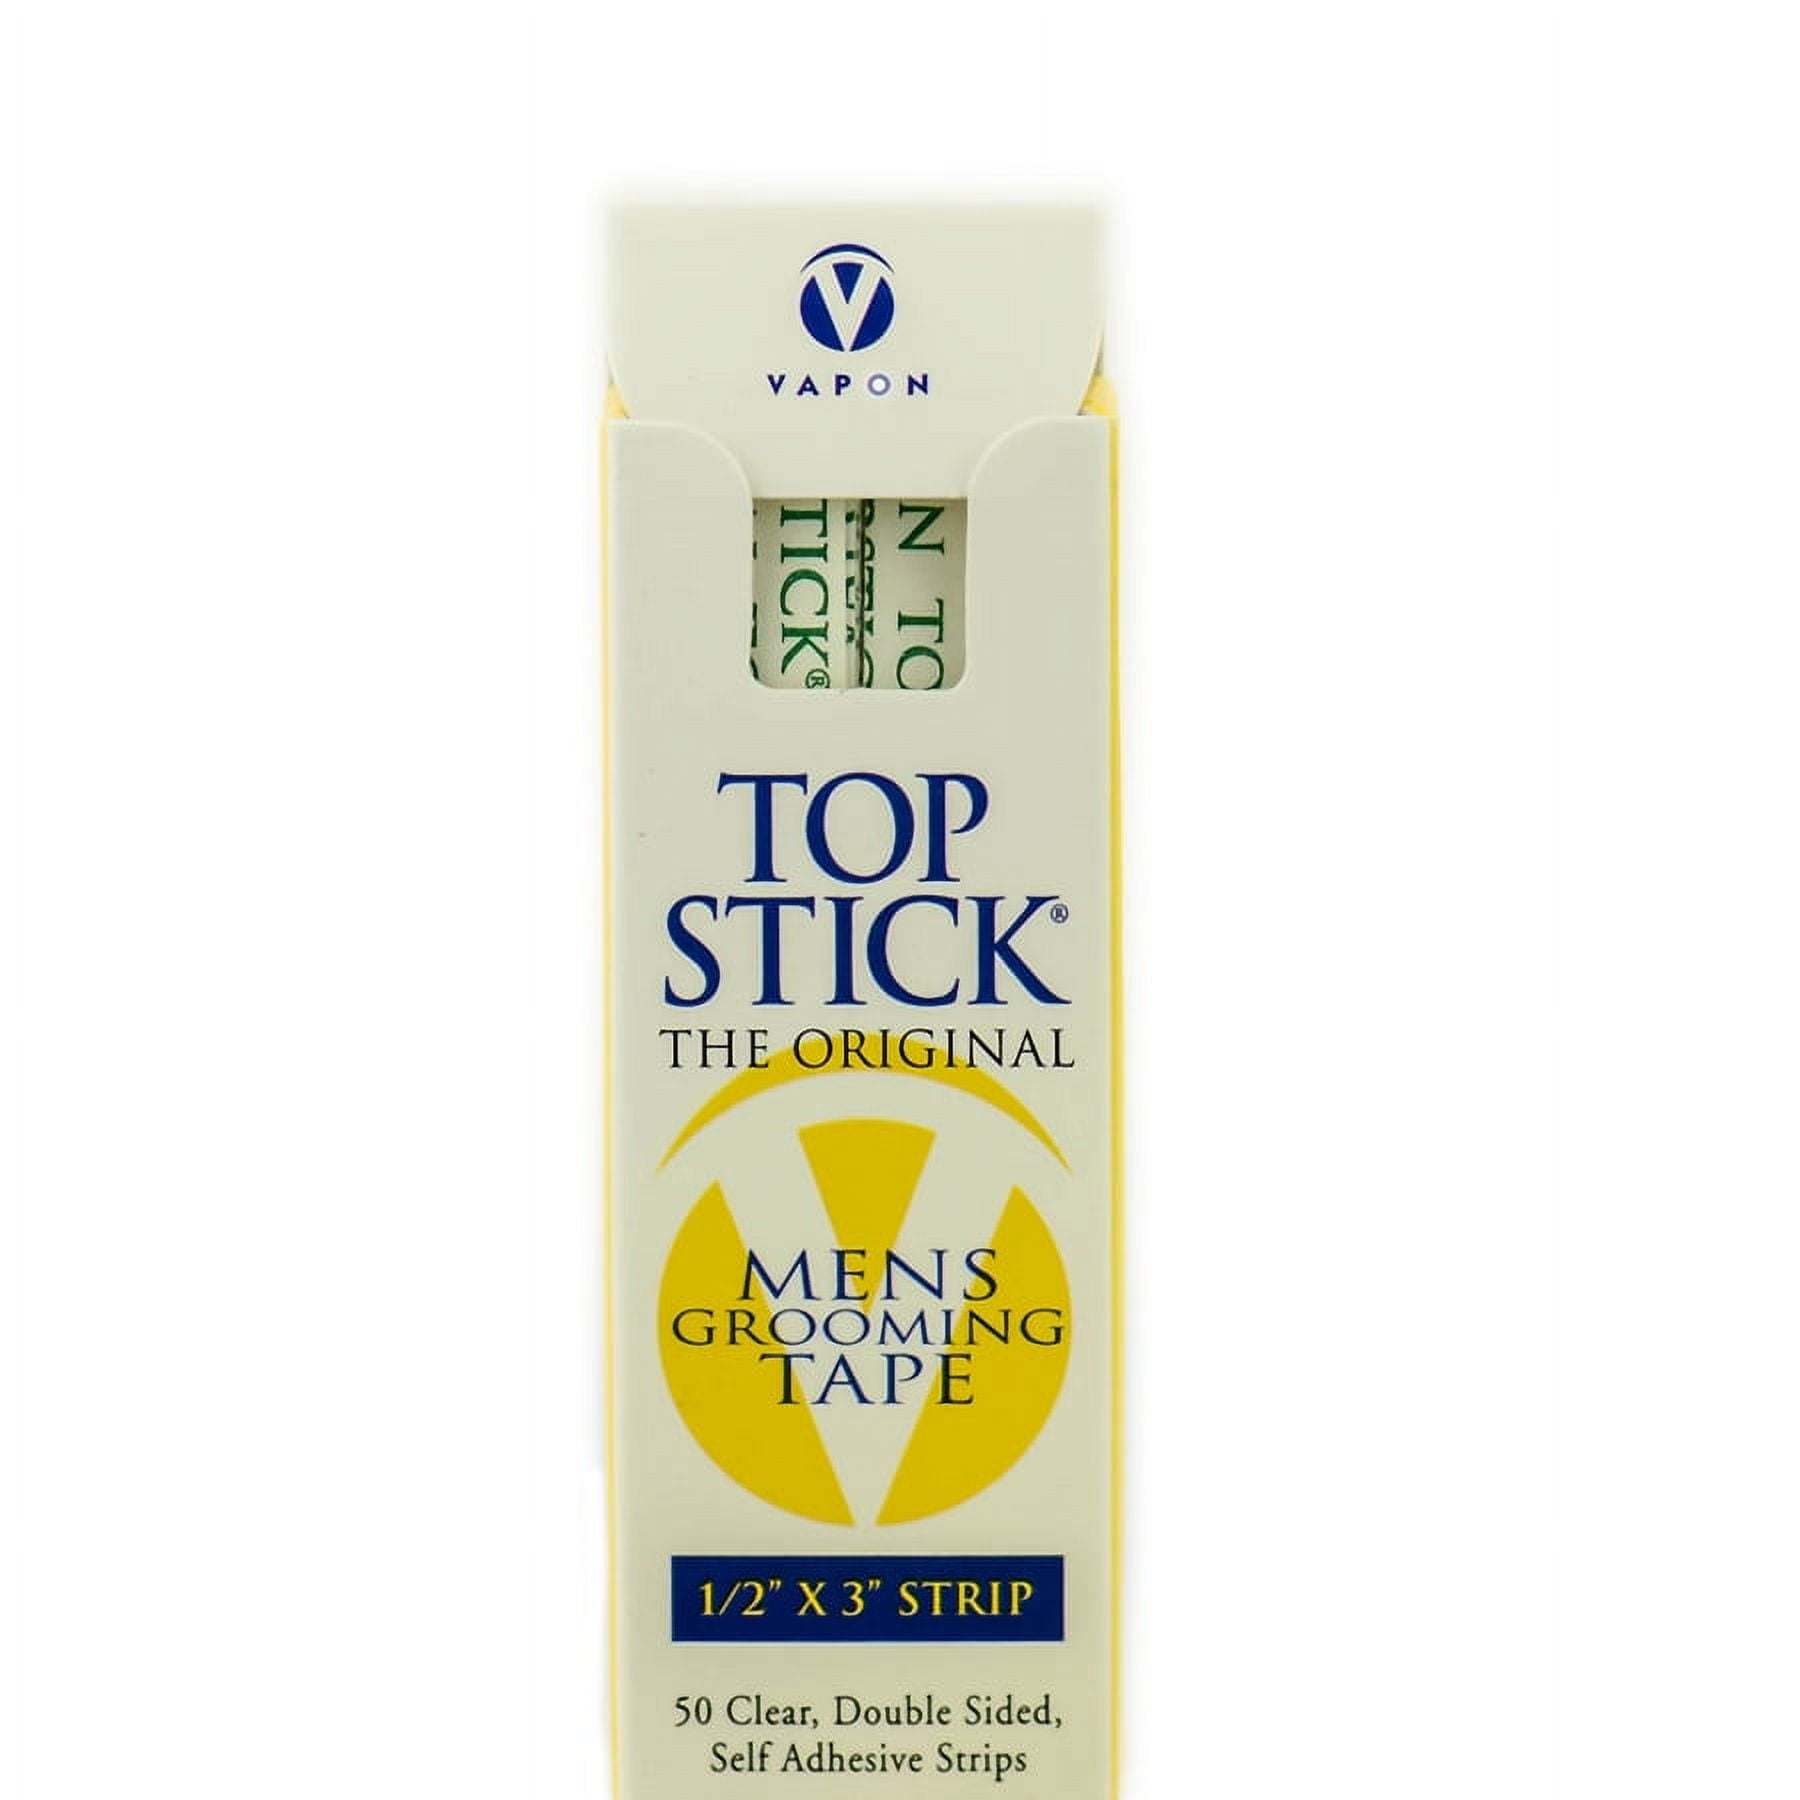 Topstick 1/2 in. x 3 in. Hairpiece Tape